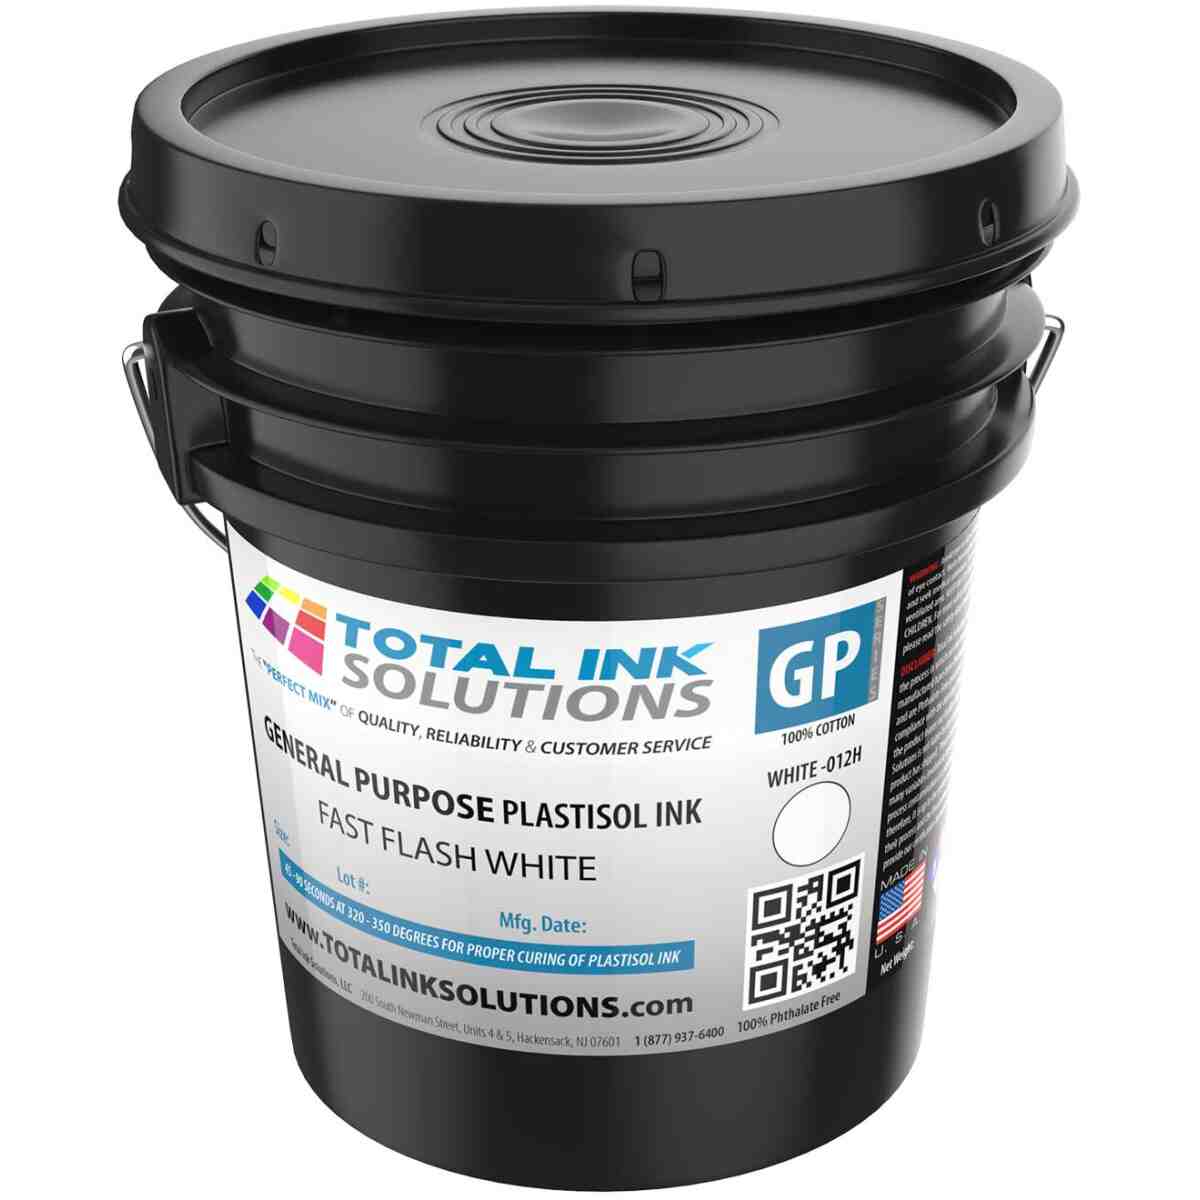 General Purpose Plastisol Ink - Fast Flash White - 5 Gallon TOTAL INK SOLUTIONS®